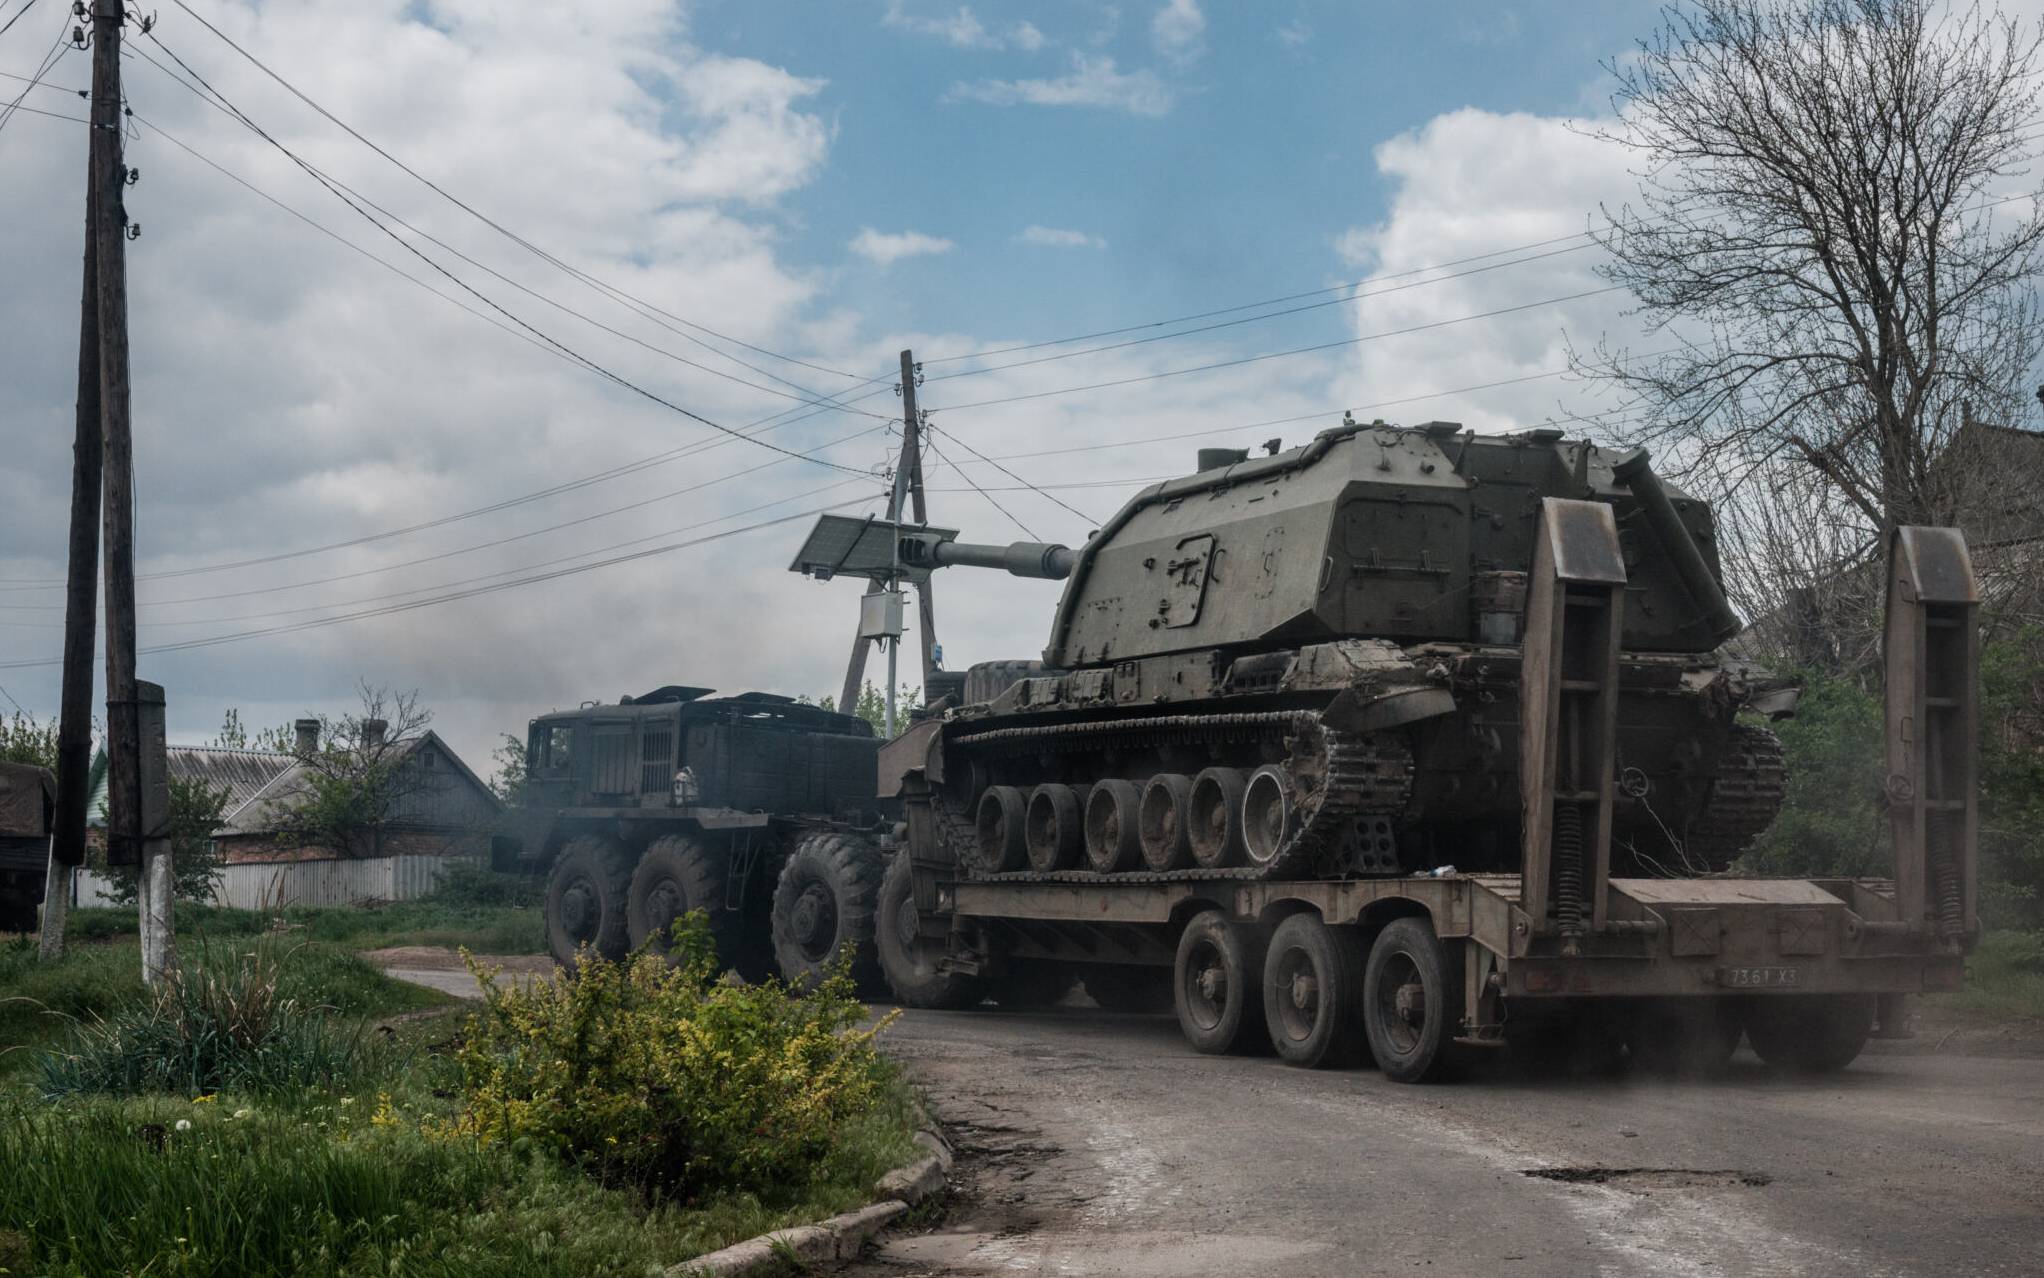 This photograph taken on May 10, 2022, shows an Ukrainian Army's self-propelled howitzer  loading on a tank transporter near Bakhmut, eastern Ukraine, amid the Russian invasion of Ukraine. (Photo by Yasuyoshi CHIBA / AFP)